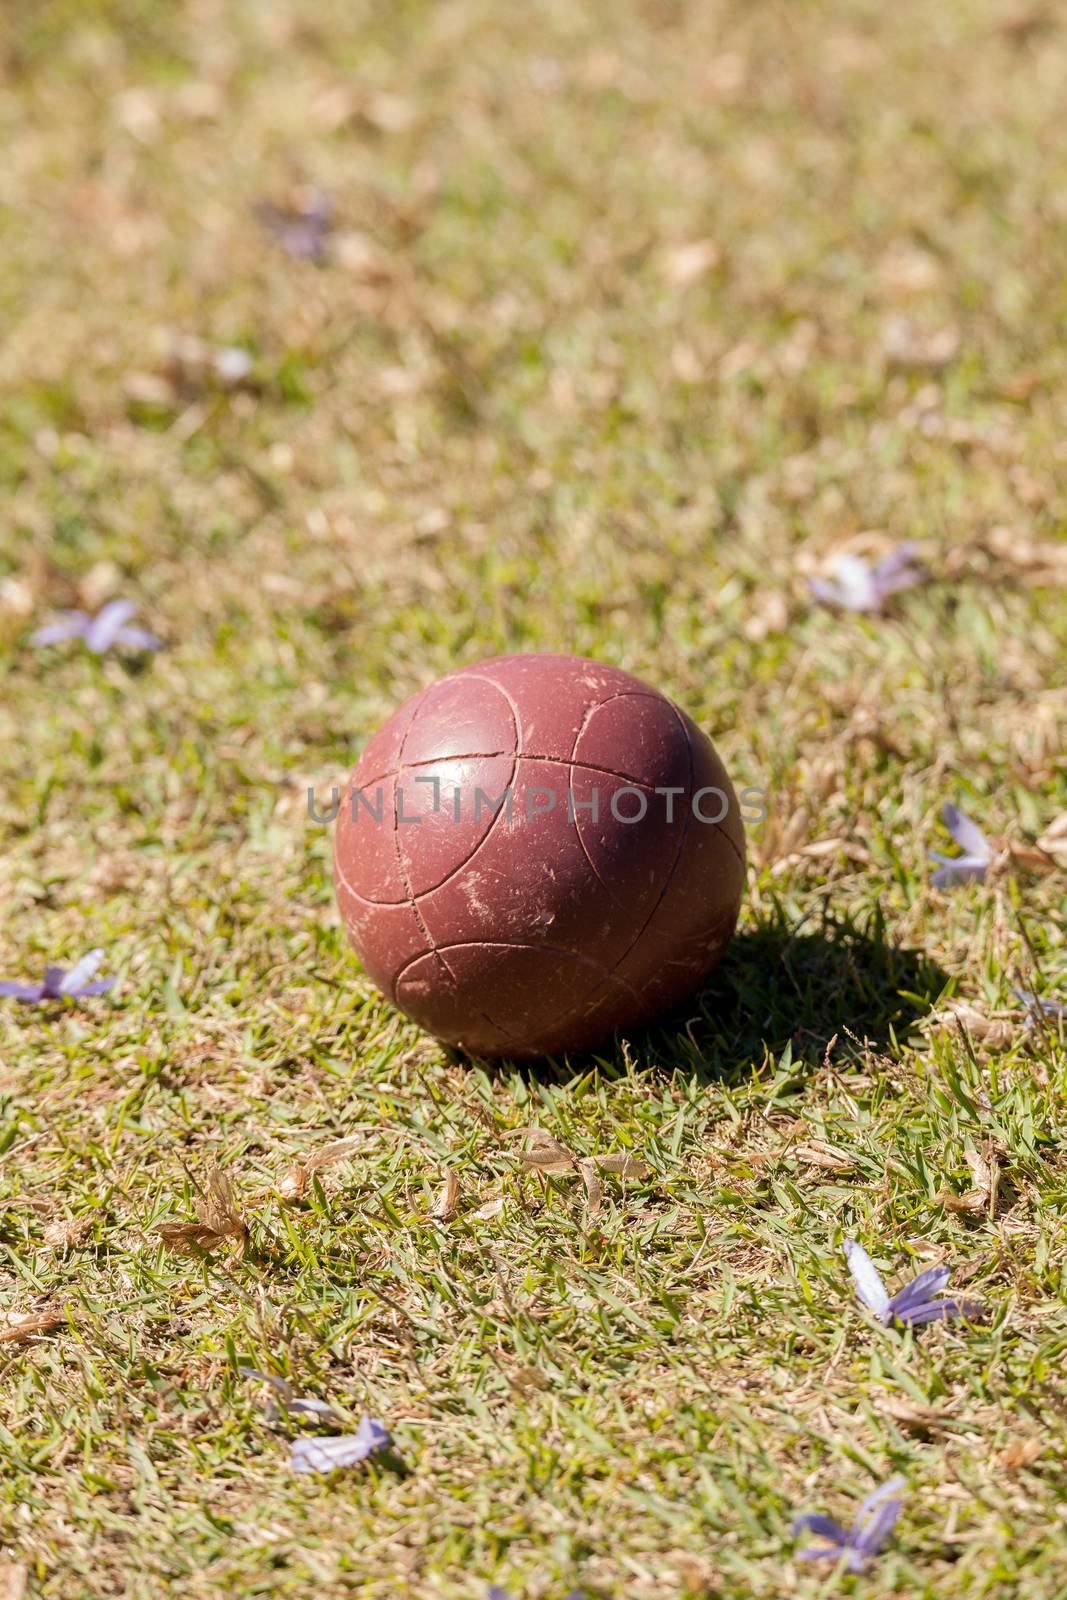 Bocce ball on the green grass of an open field ready for sport in Naples, Florida